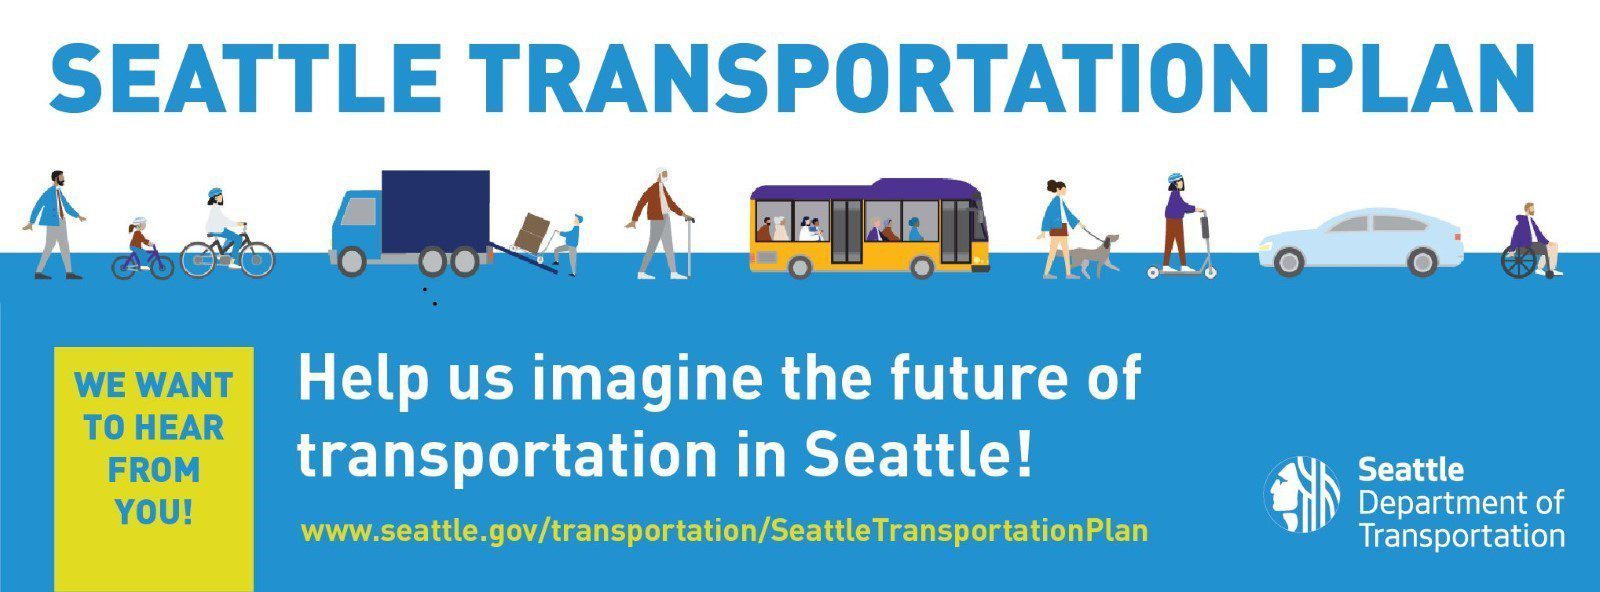 Graphic highlighting the Seattle Transportation Plan and opportunities to provide public input to help imagine the future of transportation in Seattle.